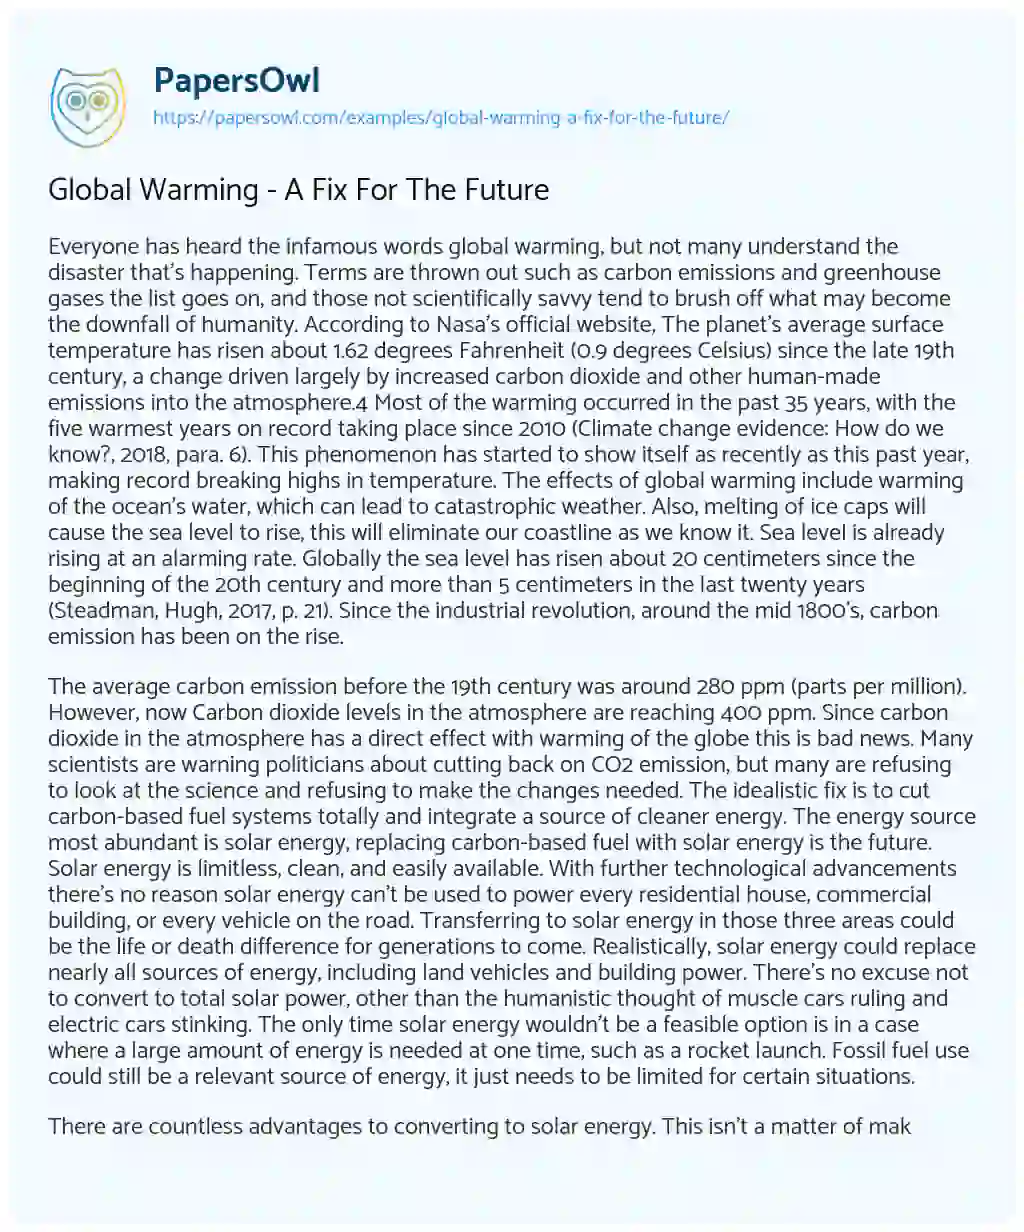 Essay on Global Warming – a Fix for the Future